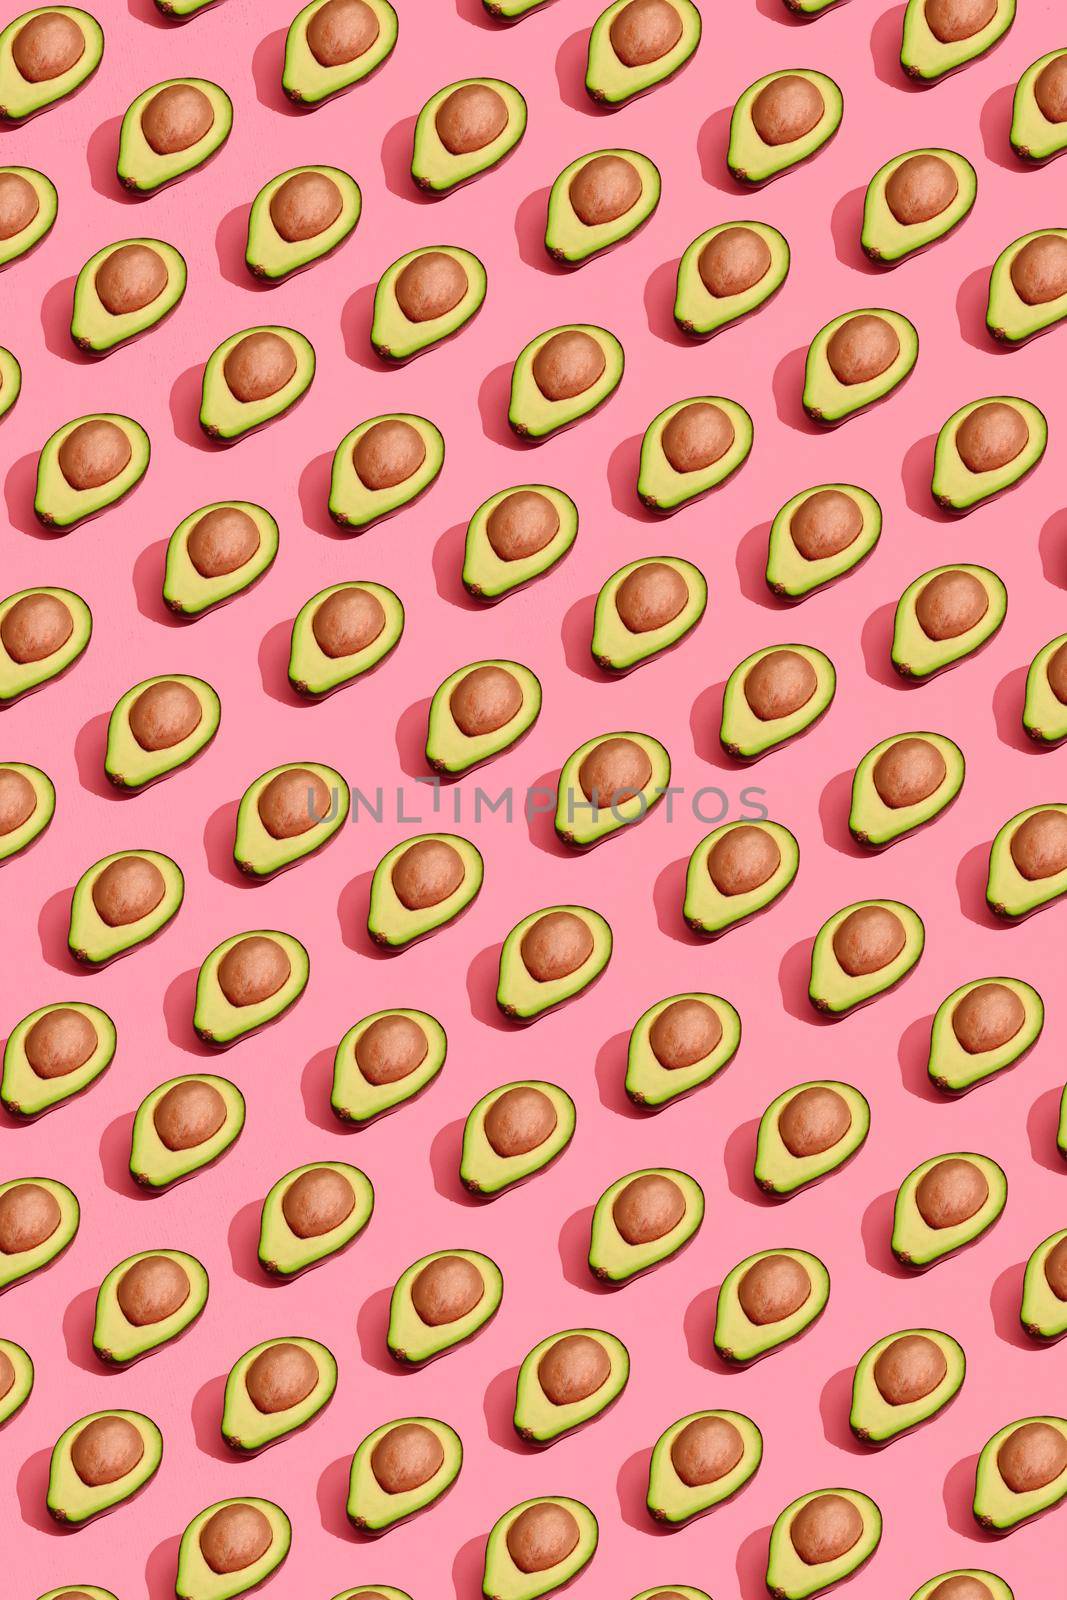 Food design. Top view of colorful fruit pattern of fresh cutted avocado halves with pits inside on coral pink pastel background. Mock up, flat lay style.